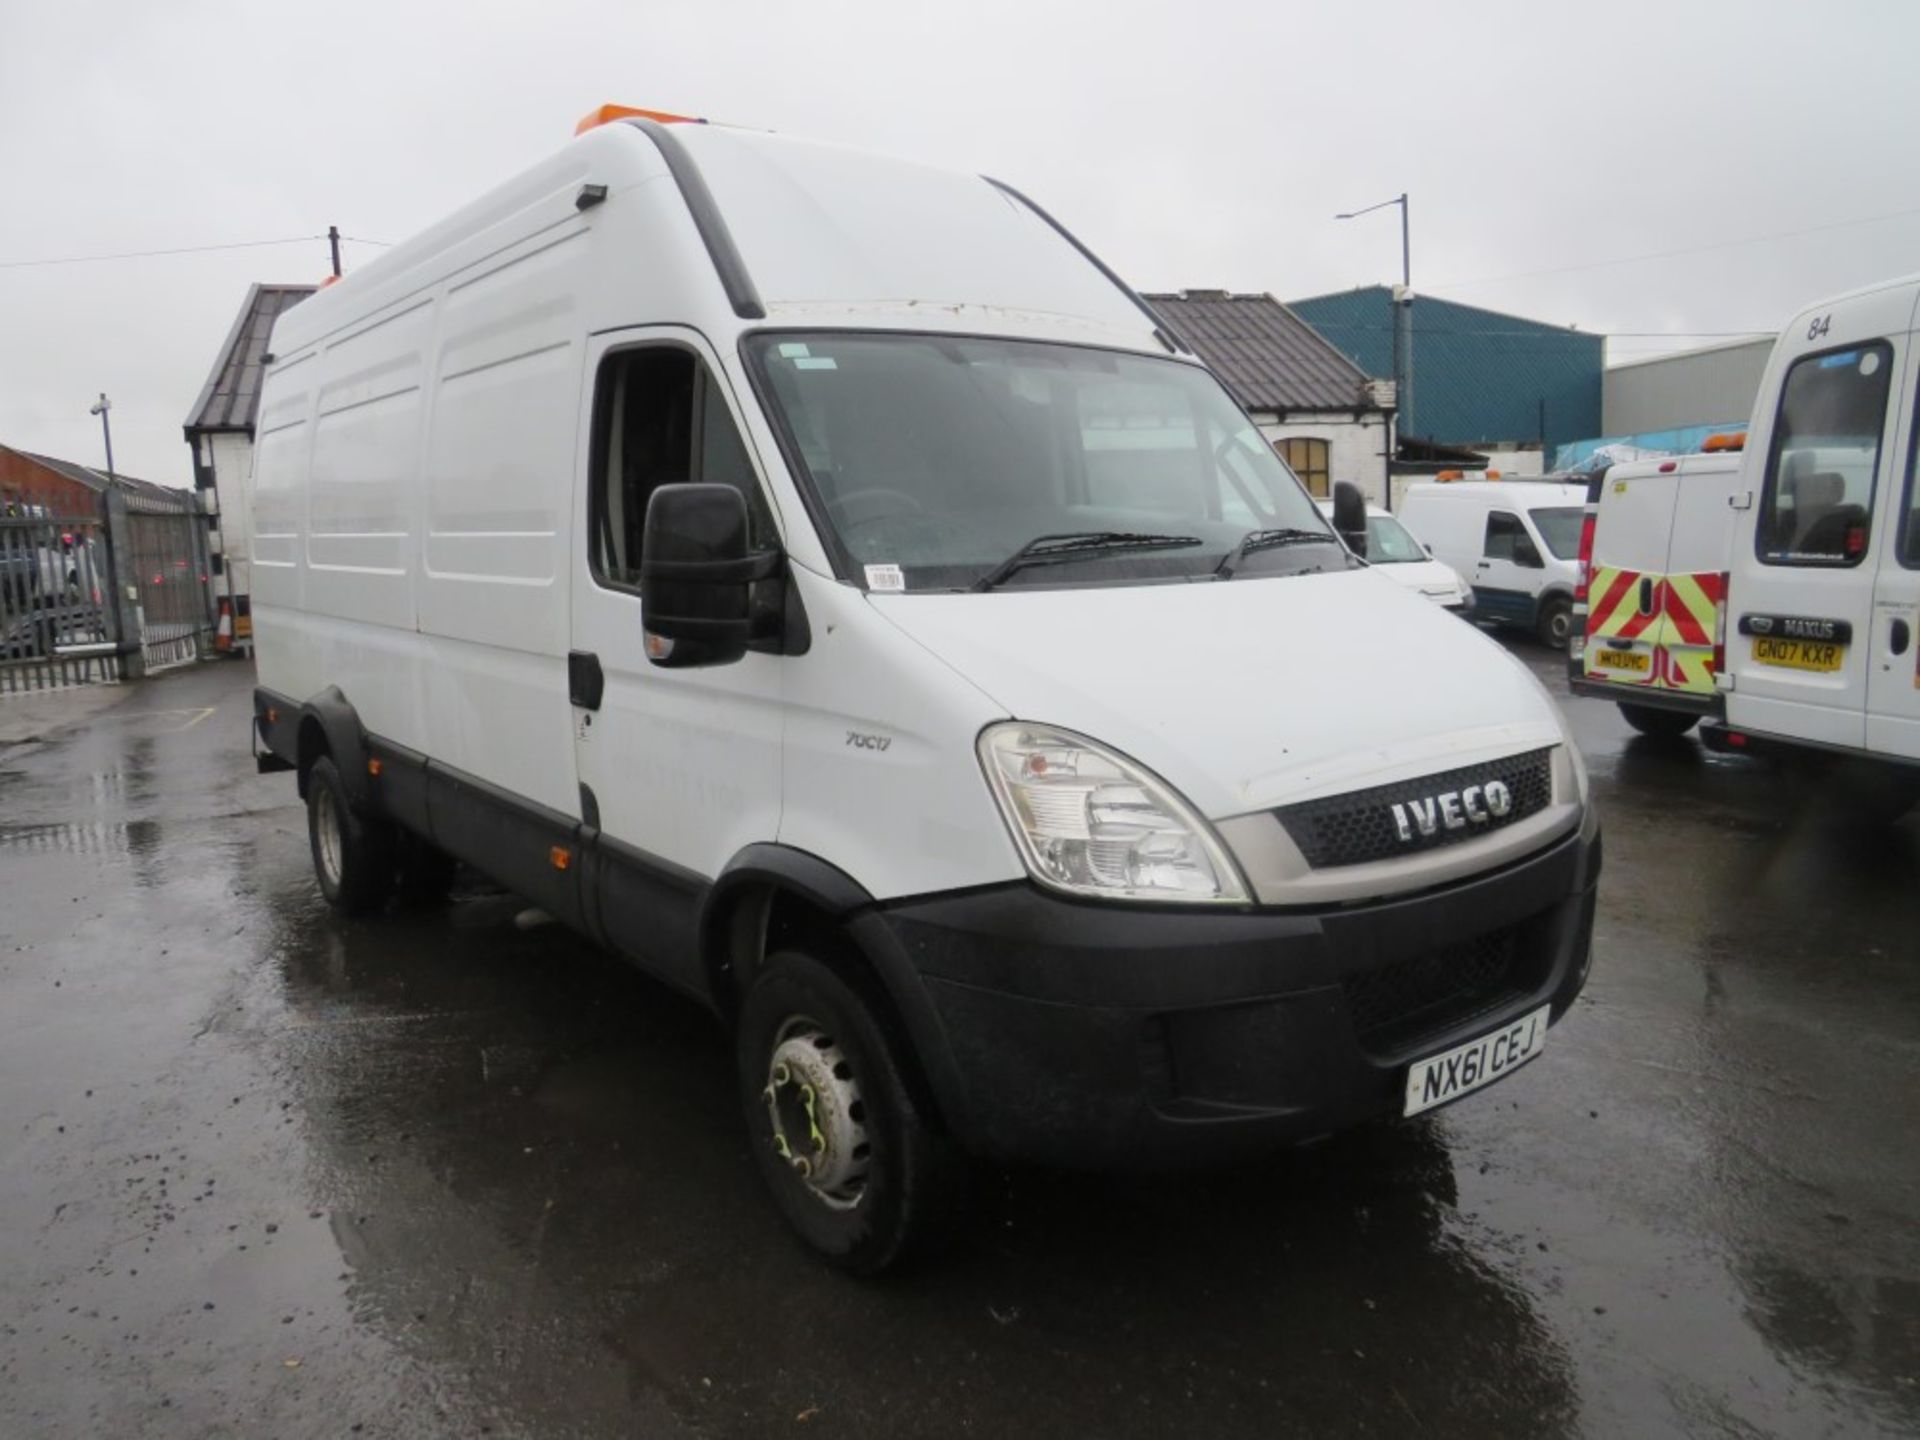 61 reg IVECO DAILY 70C17 WHALE DRAIN JETTER, 1ST REG 02/12, TEST 03/21, 177909KM WARRANTED, V5 HERE,